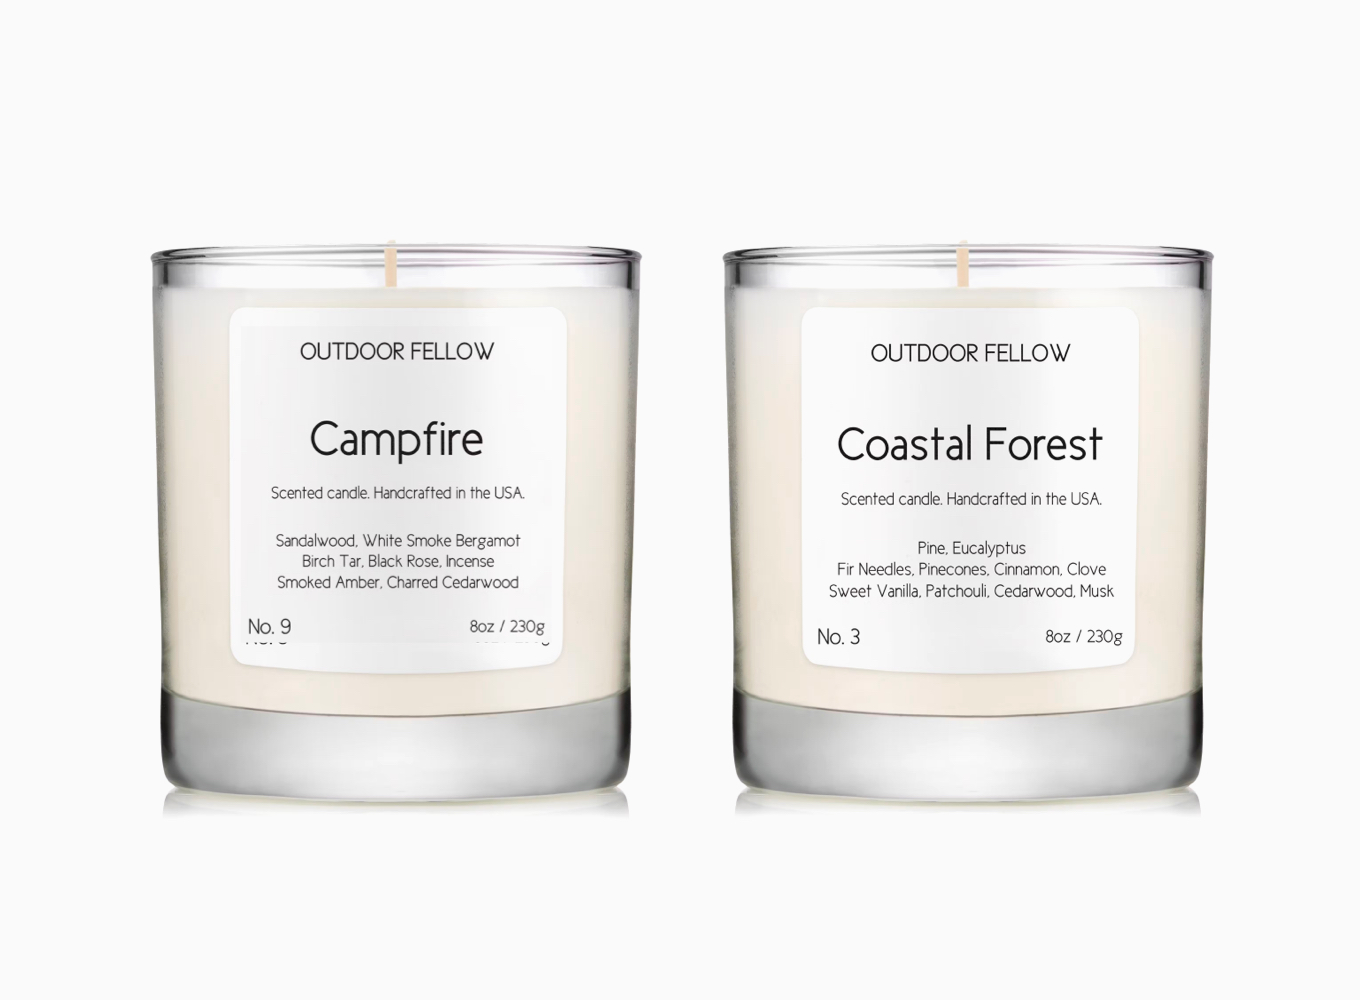 OUTDOOR FELLOW SCENTED CANDLES